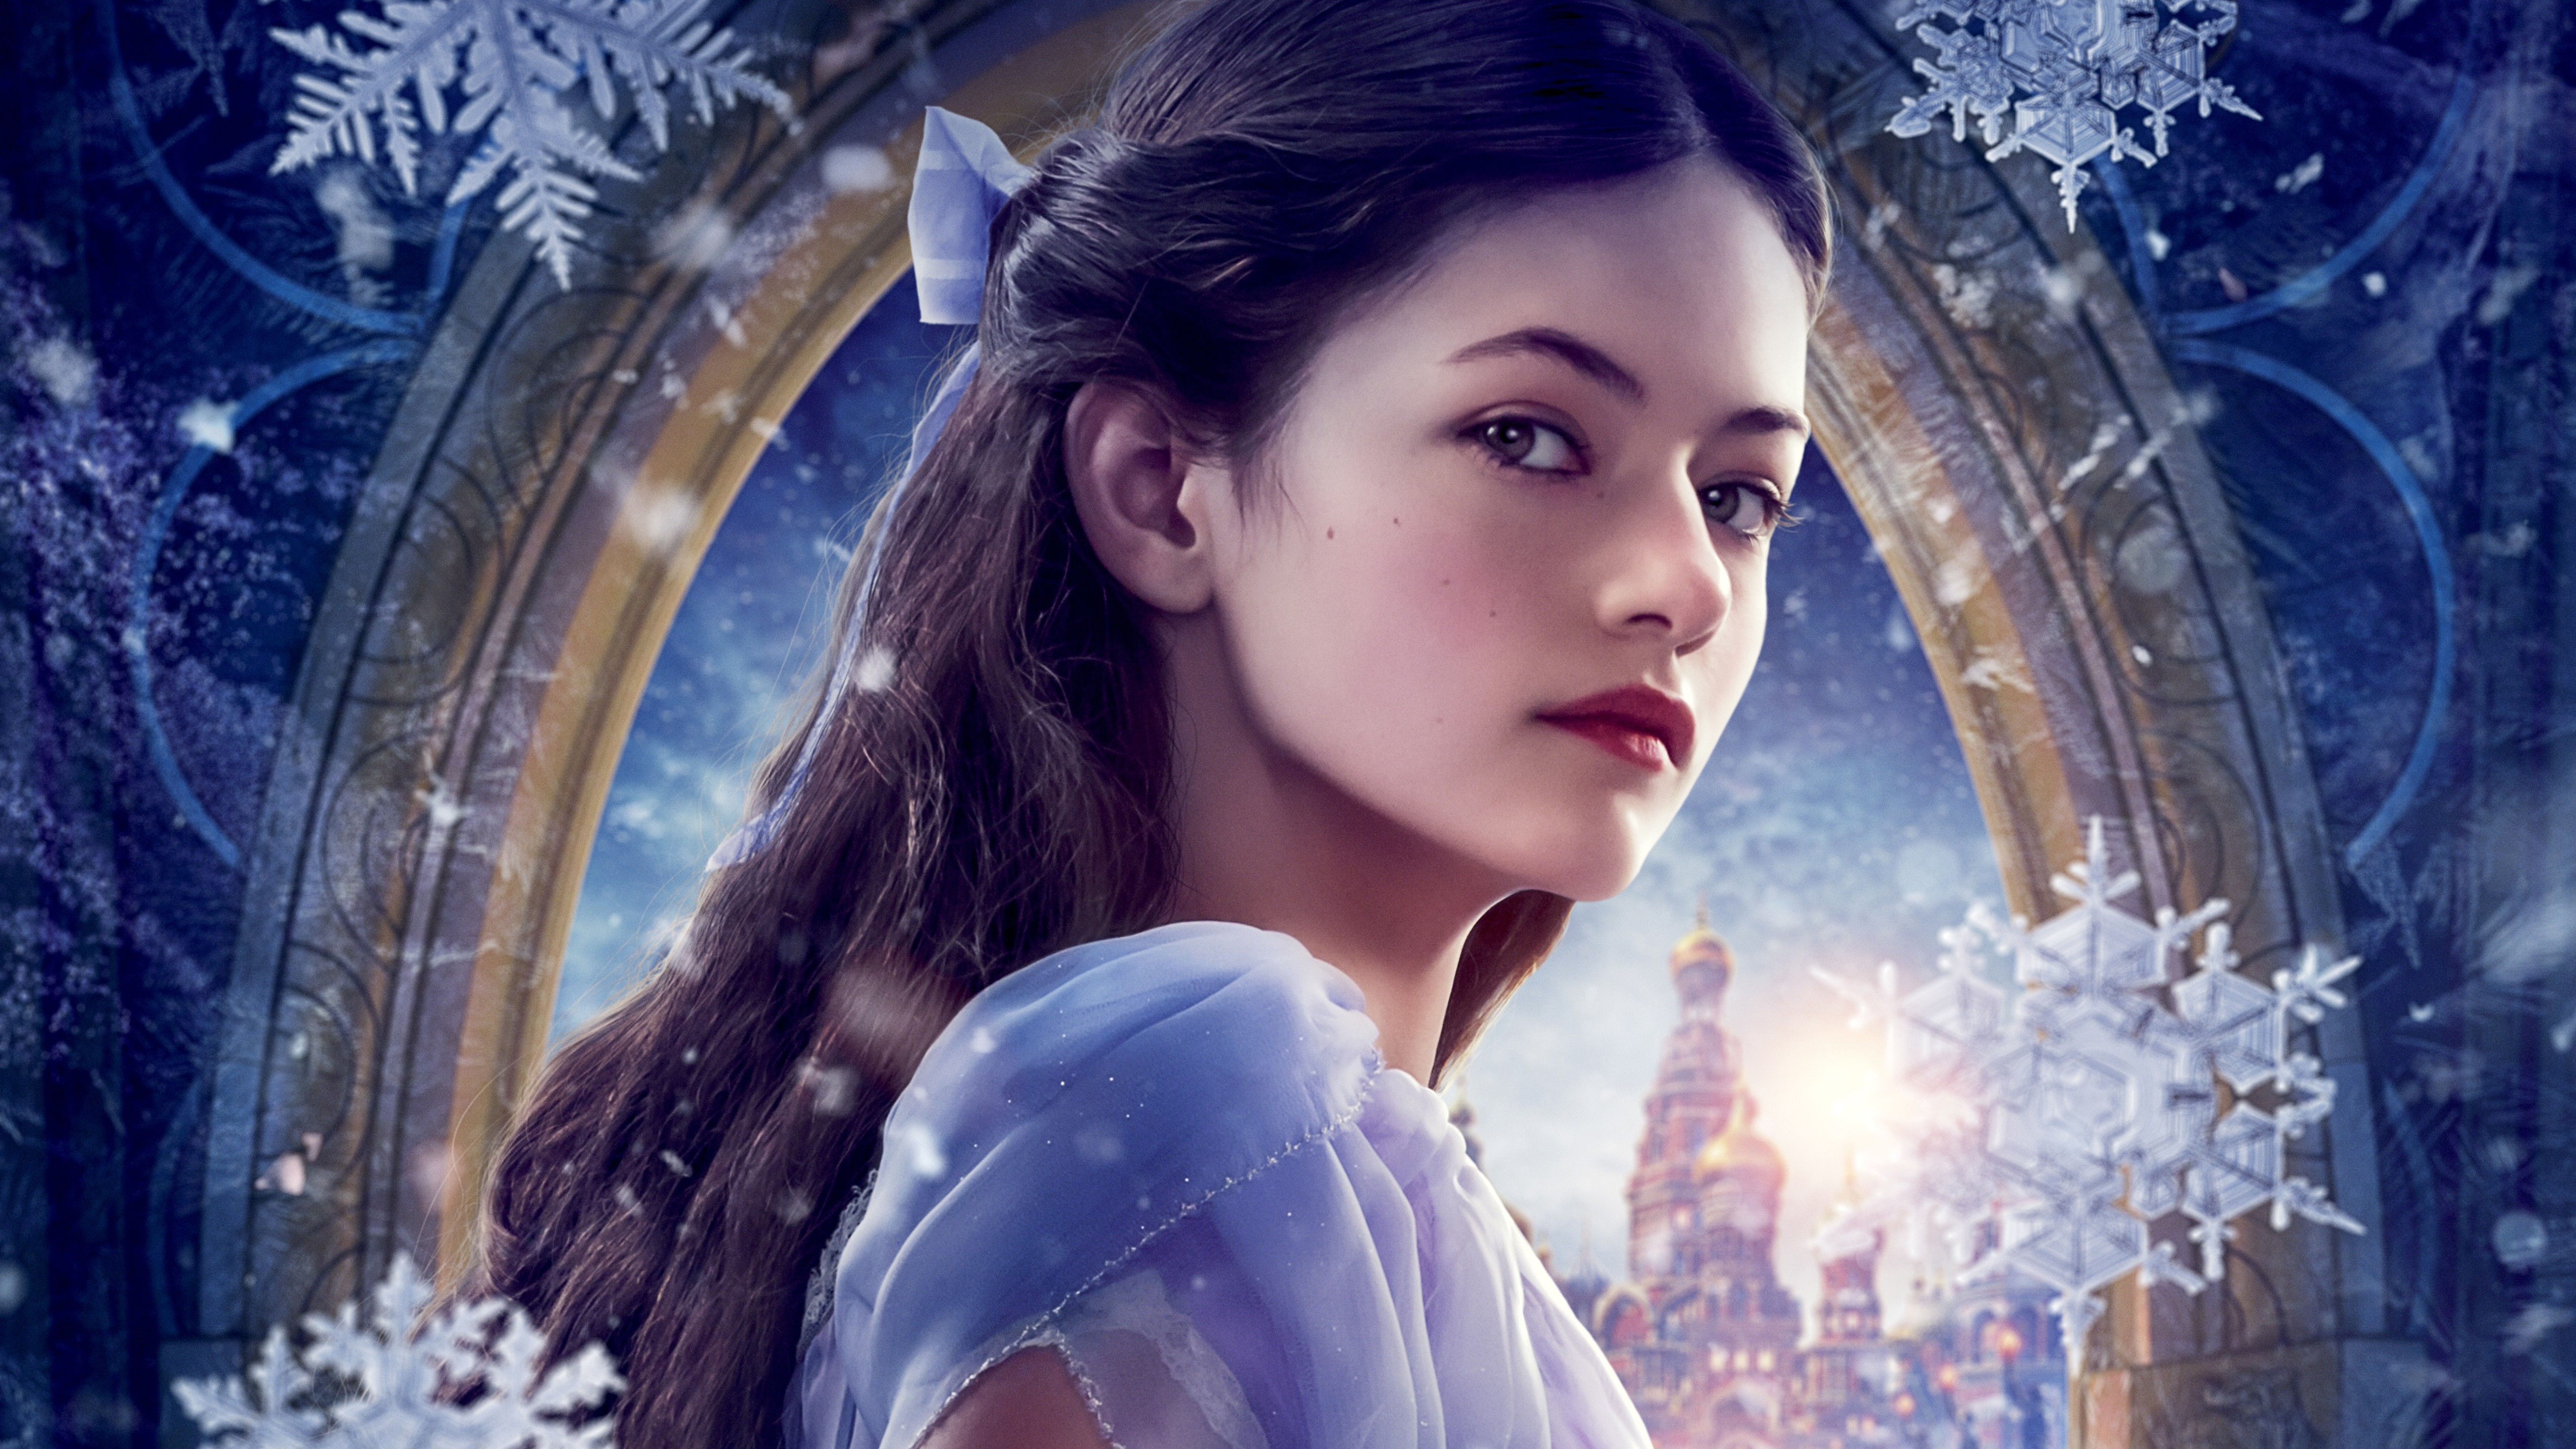 Movie The Nutcracker and the Four Realms HD Wallpaper | Background Image